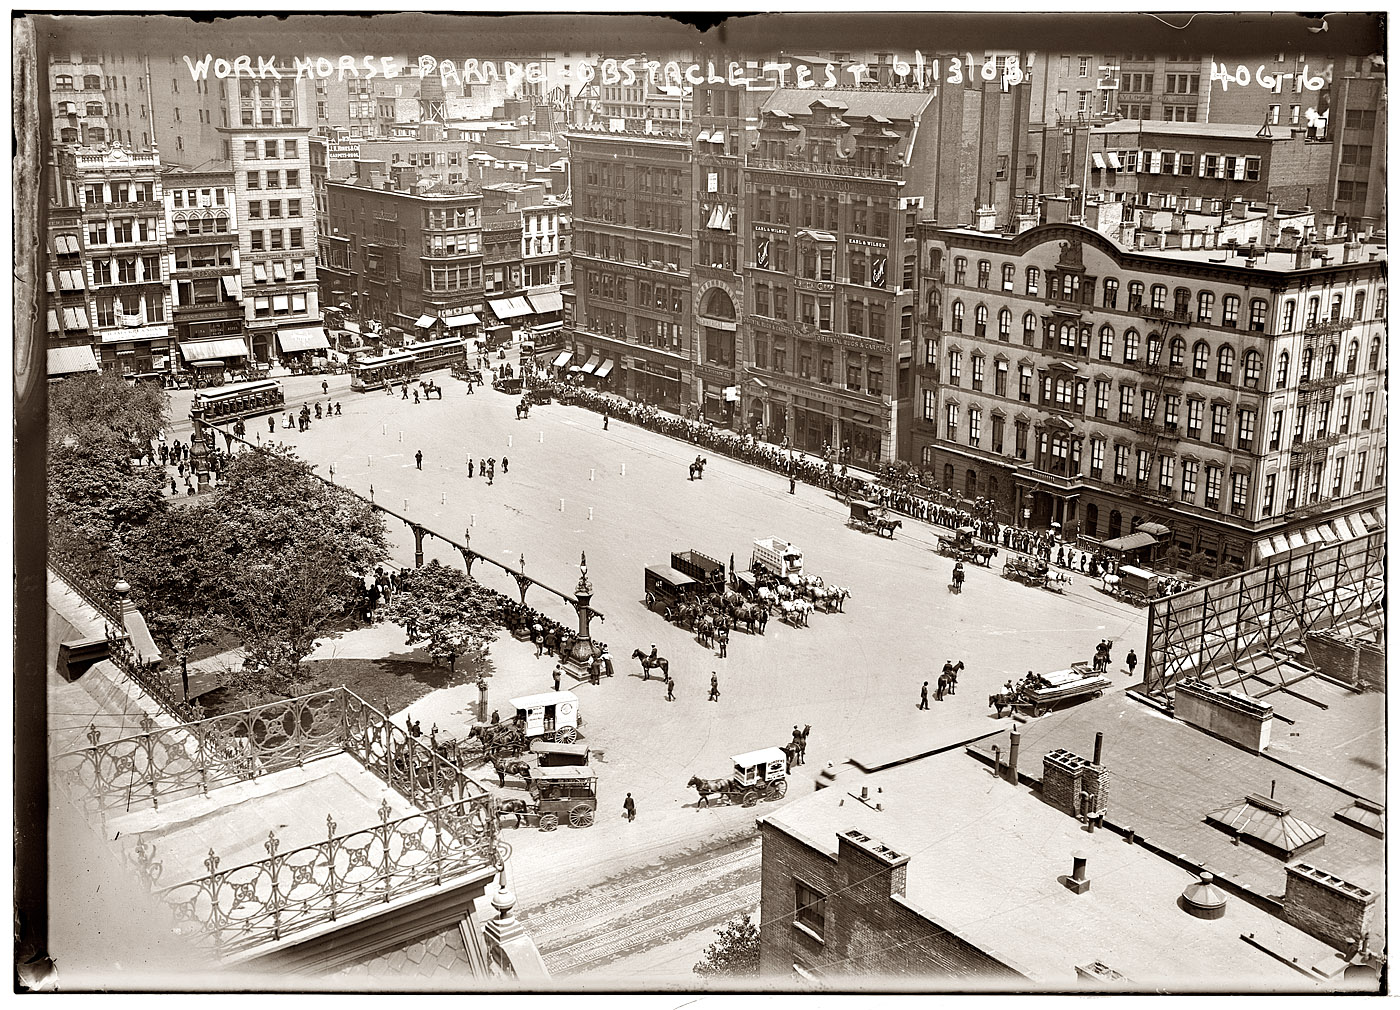 Work Horse Parade obstacle course on Union Square, New York City. June 13, 1908. View full size. 5x7 glass negative, George Grantham Bain Collection.